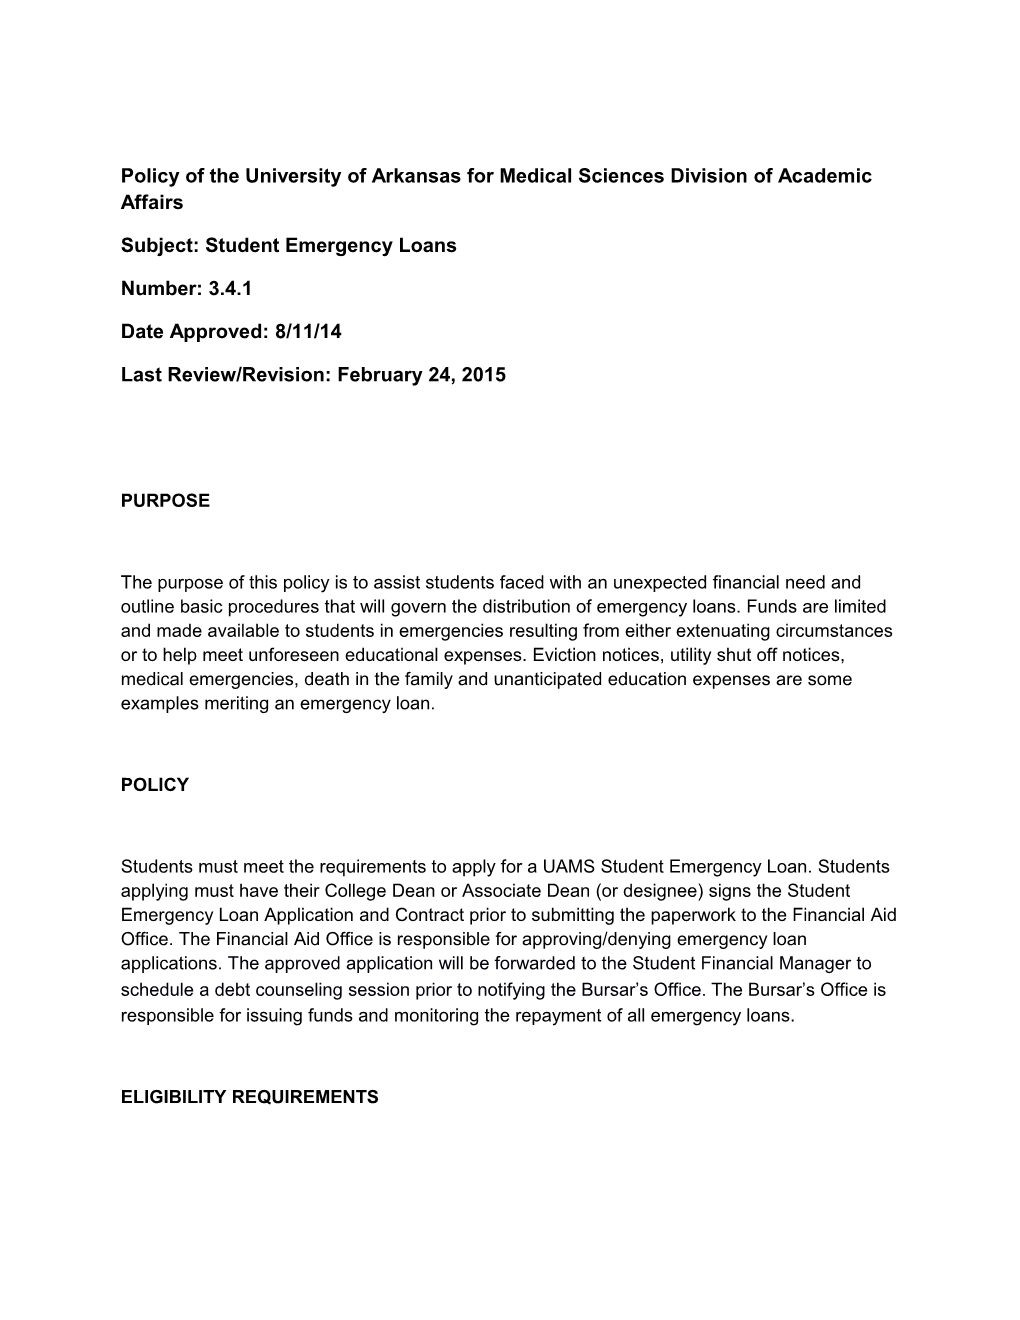 Policy of the University of Arkansas for Medical Sciences Division of Academic Affairs